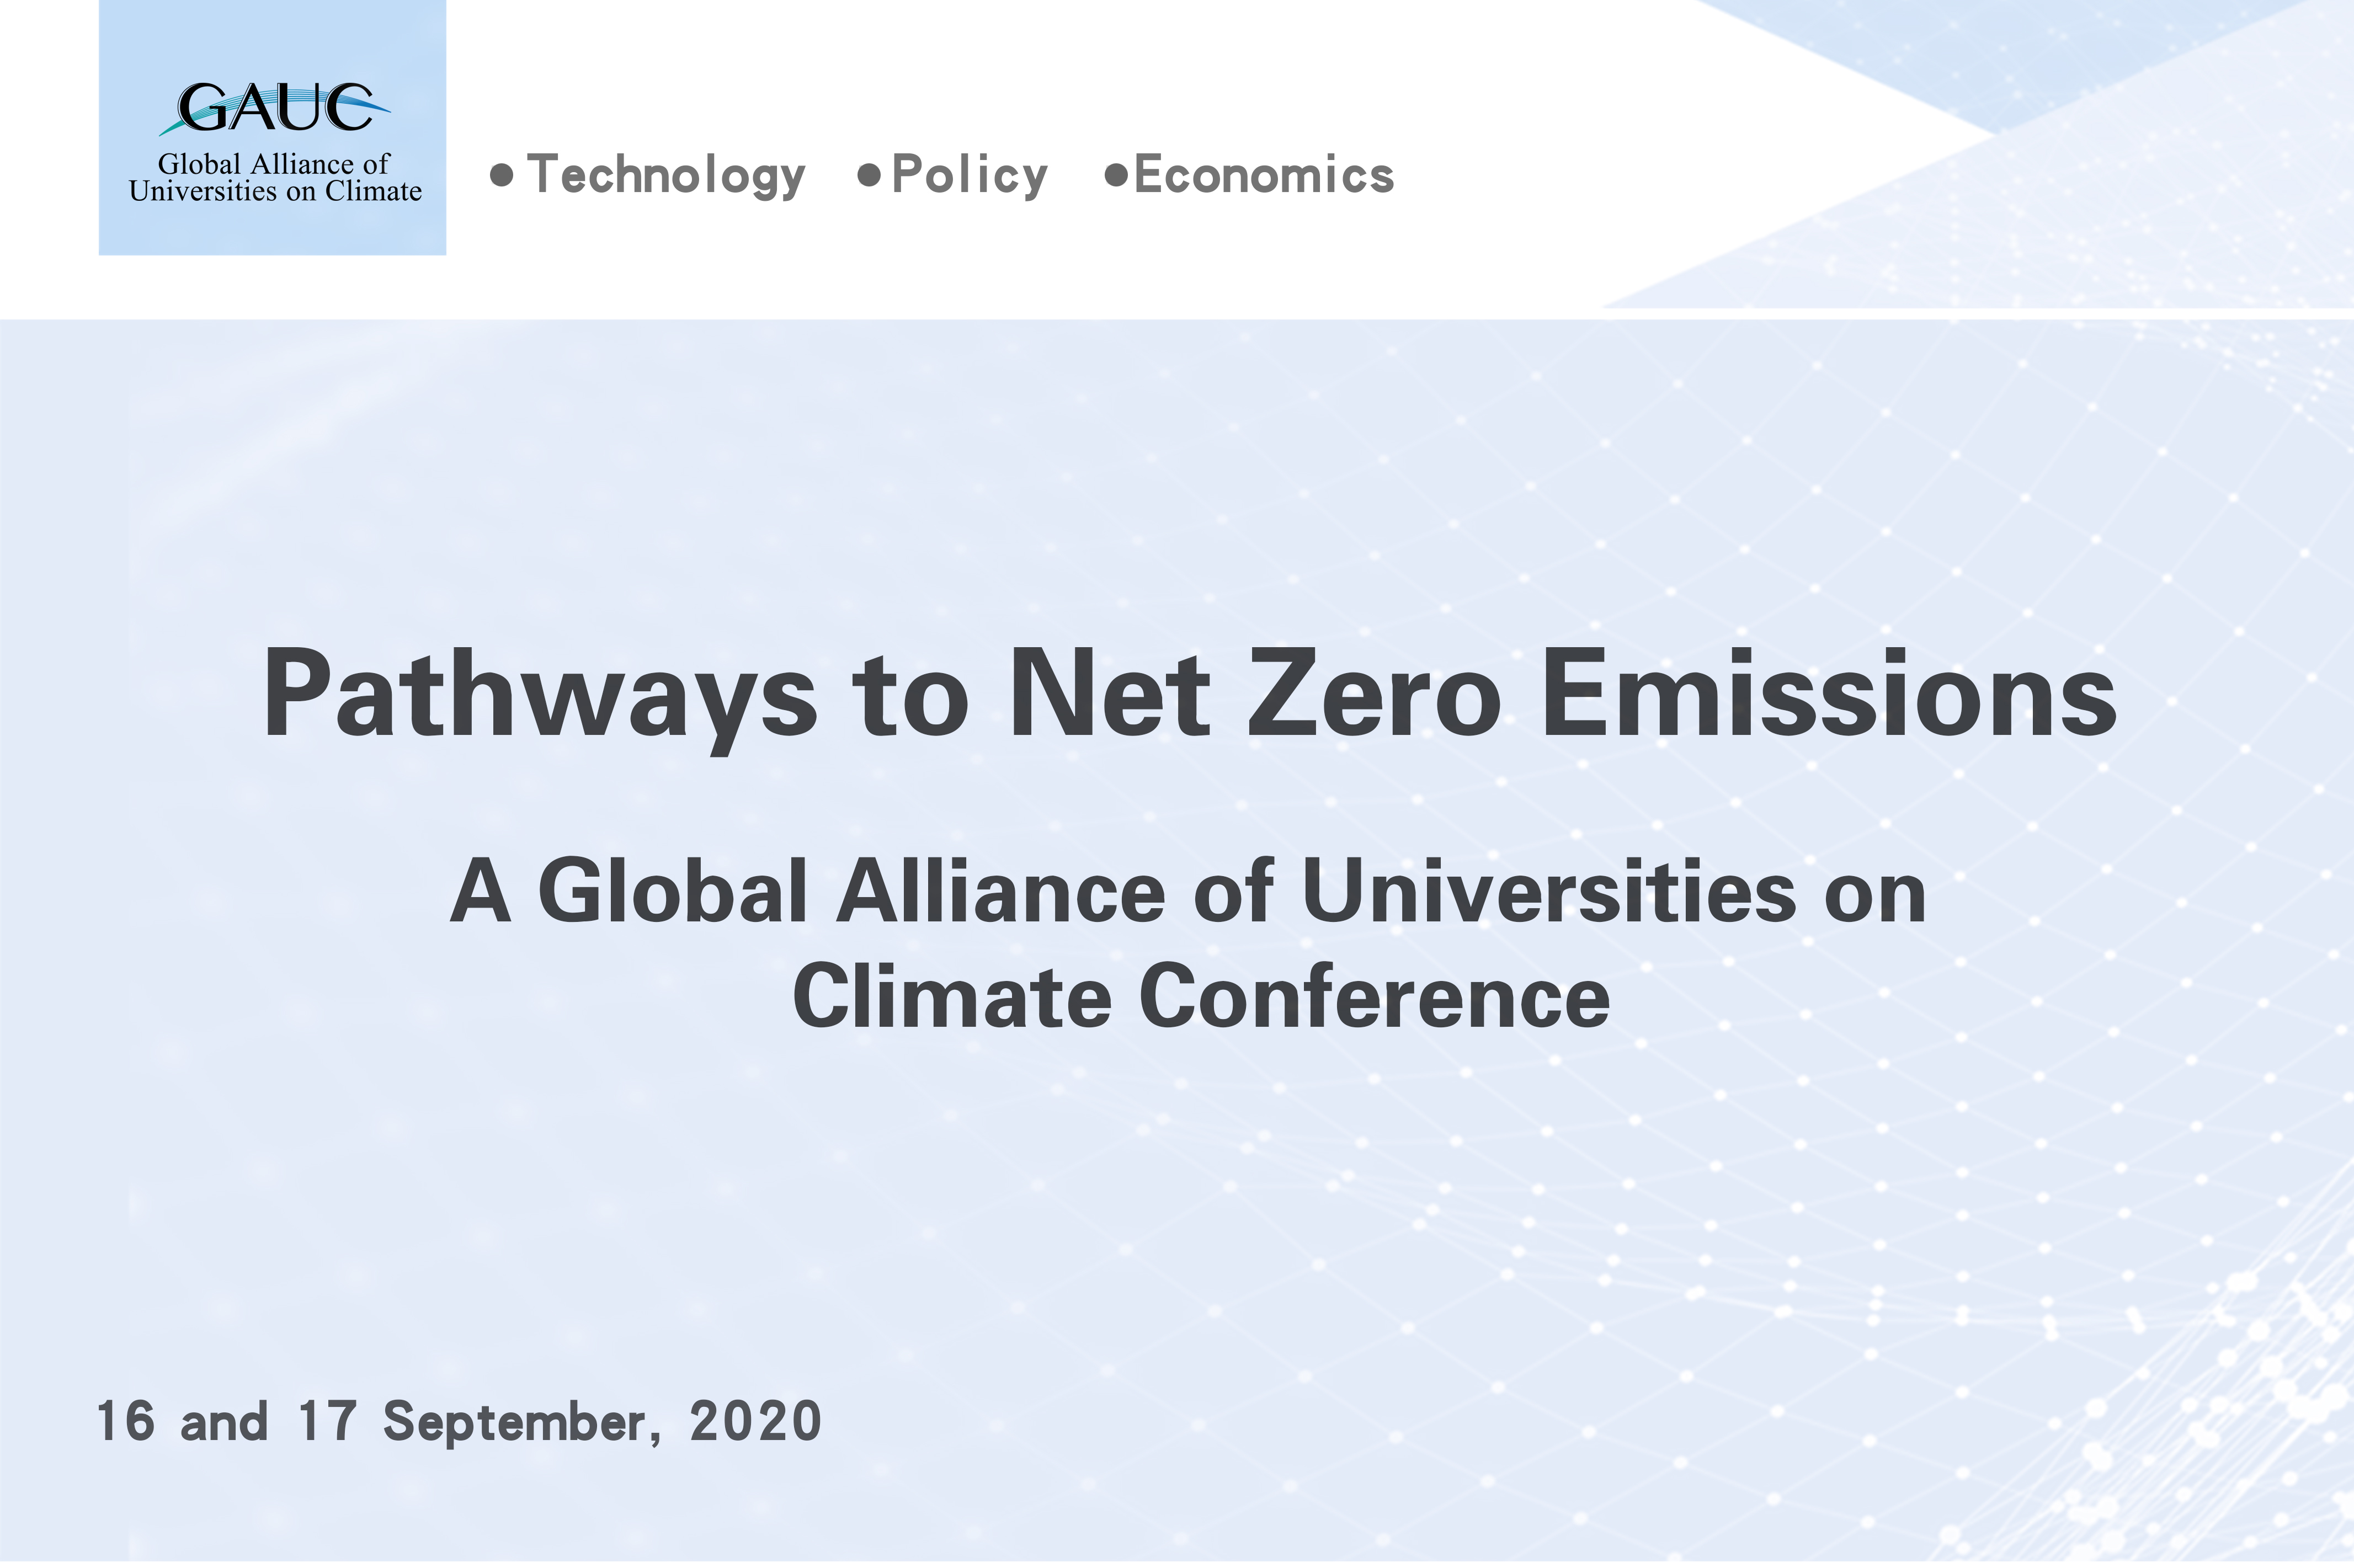 A statement on net zero emissions and carbon neutrality  Global Alliance of Universities on Climate  Conference on ‘Pathways to Net Zero Emissions’